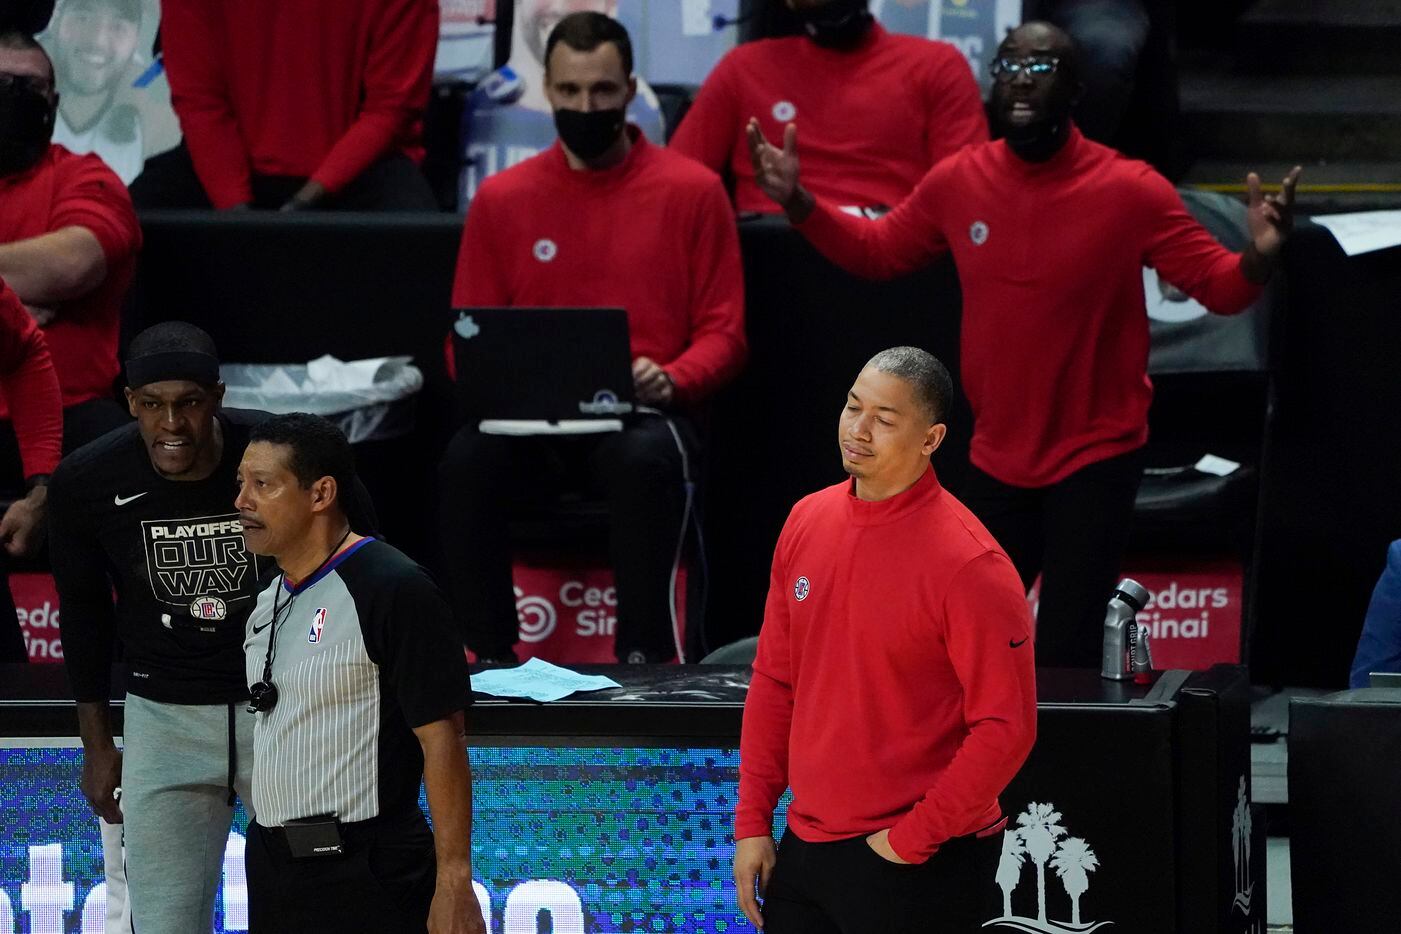 LA Clippers head coach Tyronn Lue reacts a after a foul call against his team during the second half of an NBA playoff basketball game against the Dallas Mavericks at Staples Center on Tuesday, May 25, 2021, in Los Angeles.